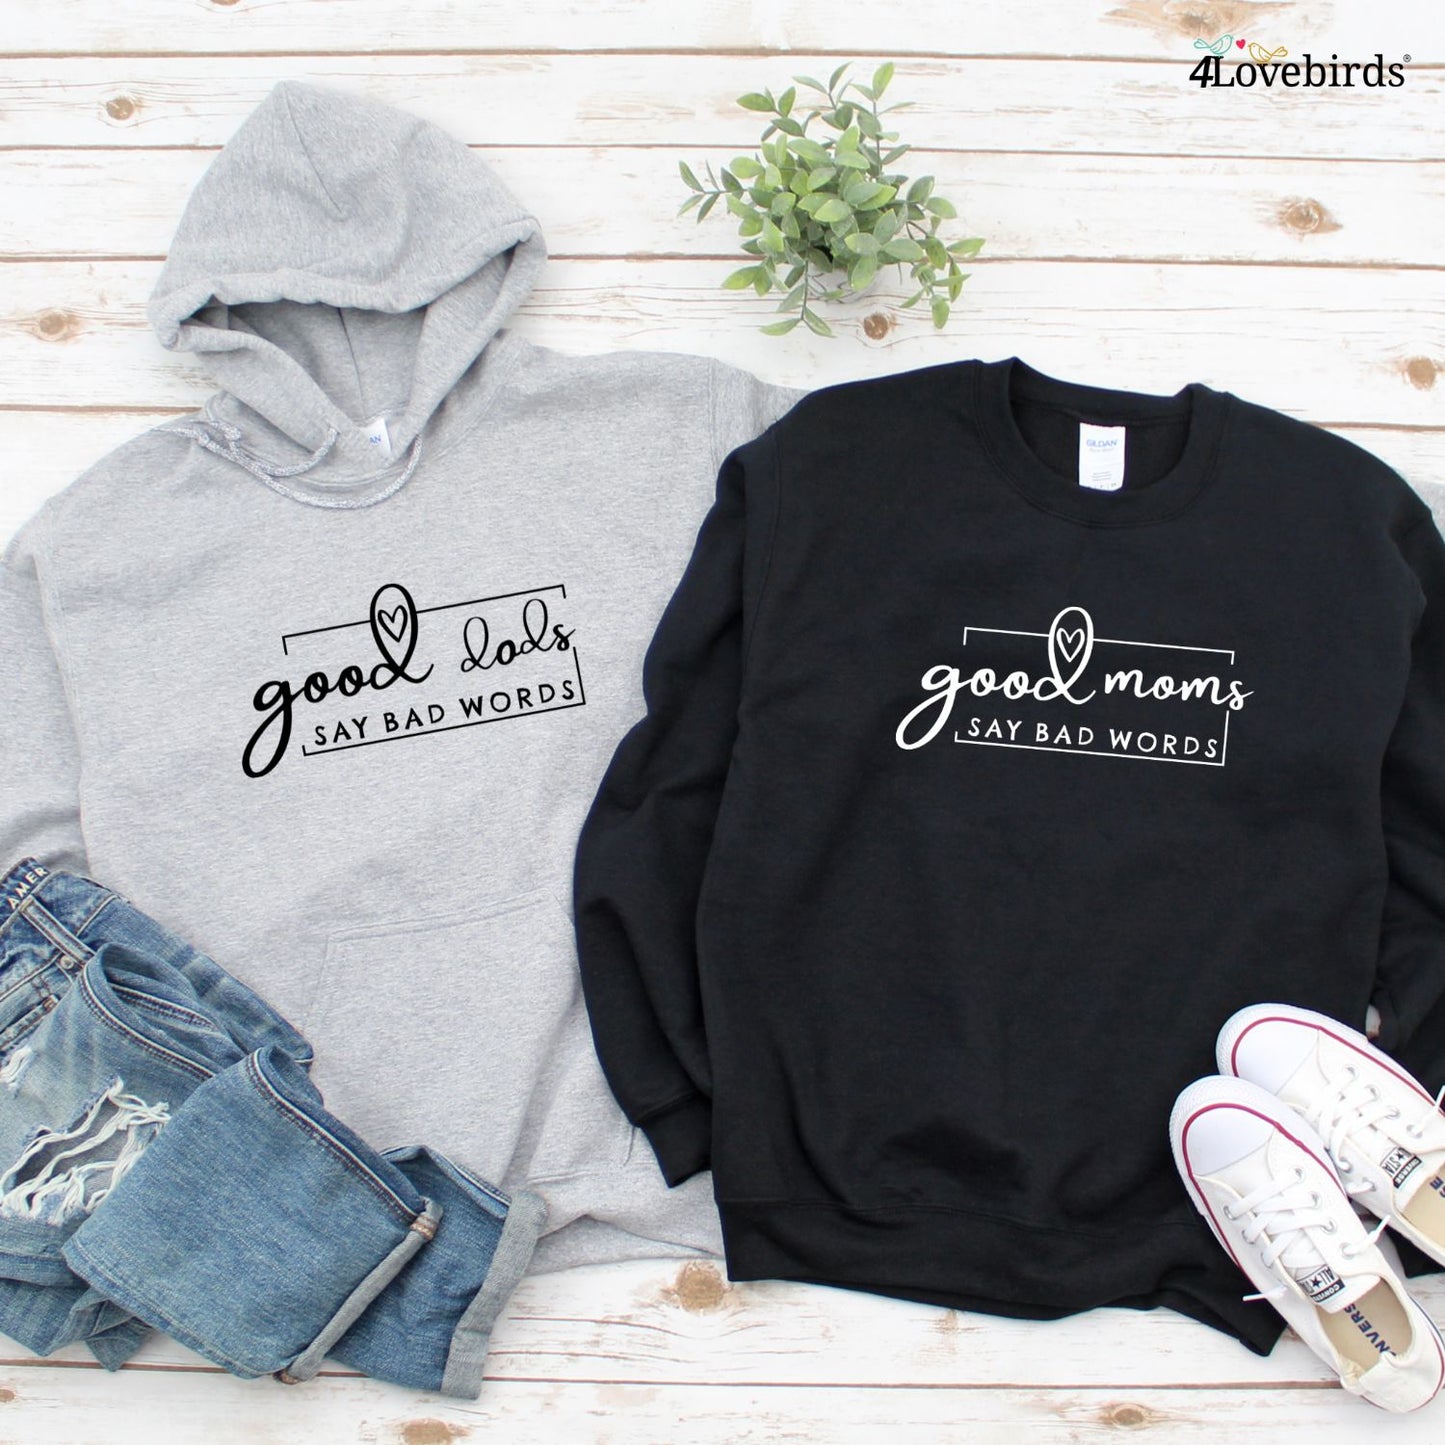 Good Moms/Dads Say Bad Words - Funny Parental Matching Outfits, Ideal Gifts for Mom & Dad